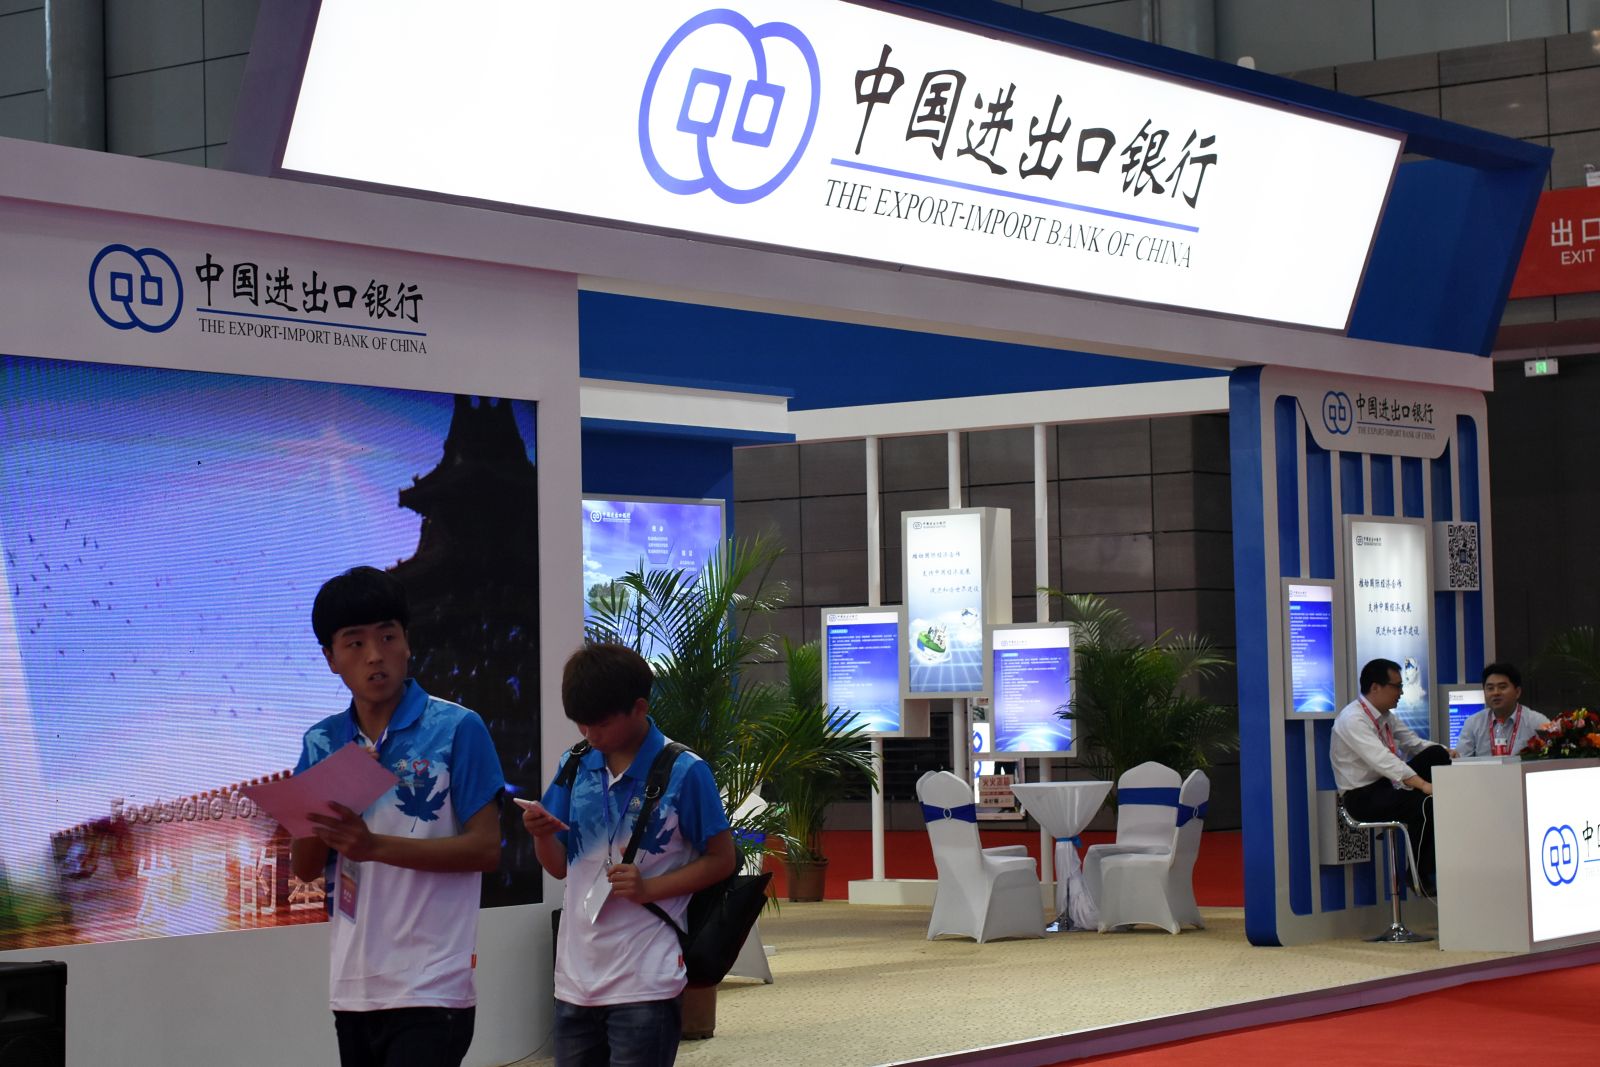 Messestand der Export-Import Bank of China.